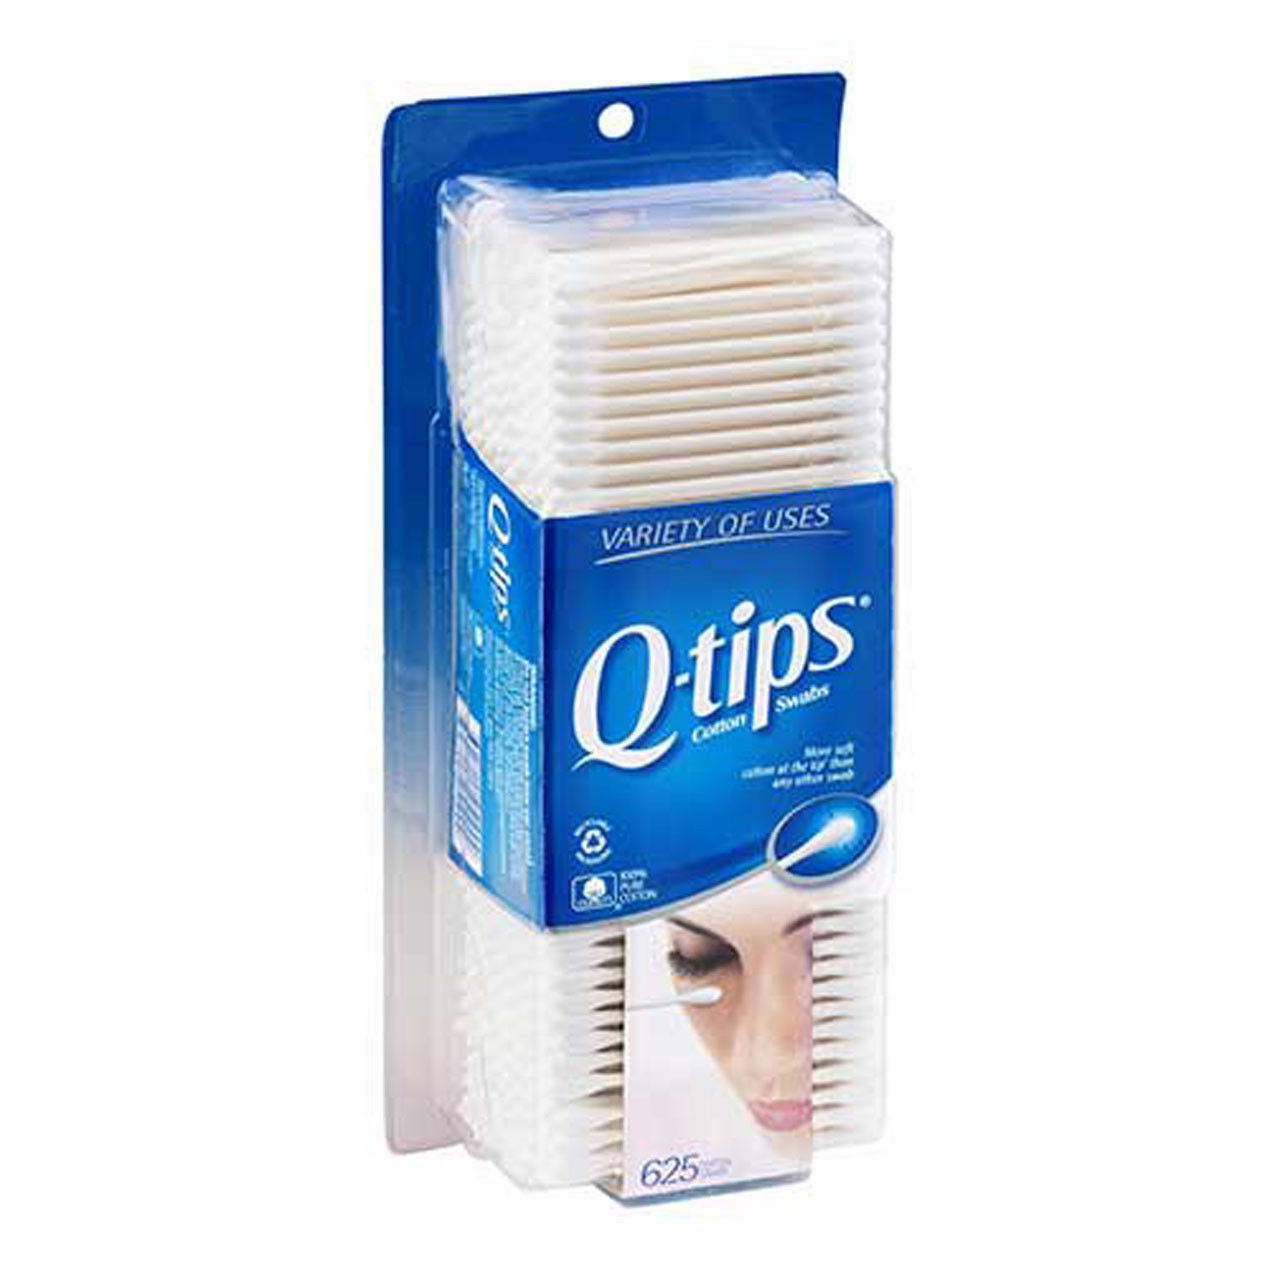 What are Q-tips cotton swabs for?